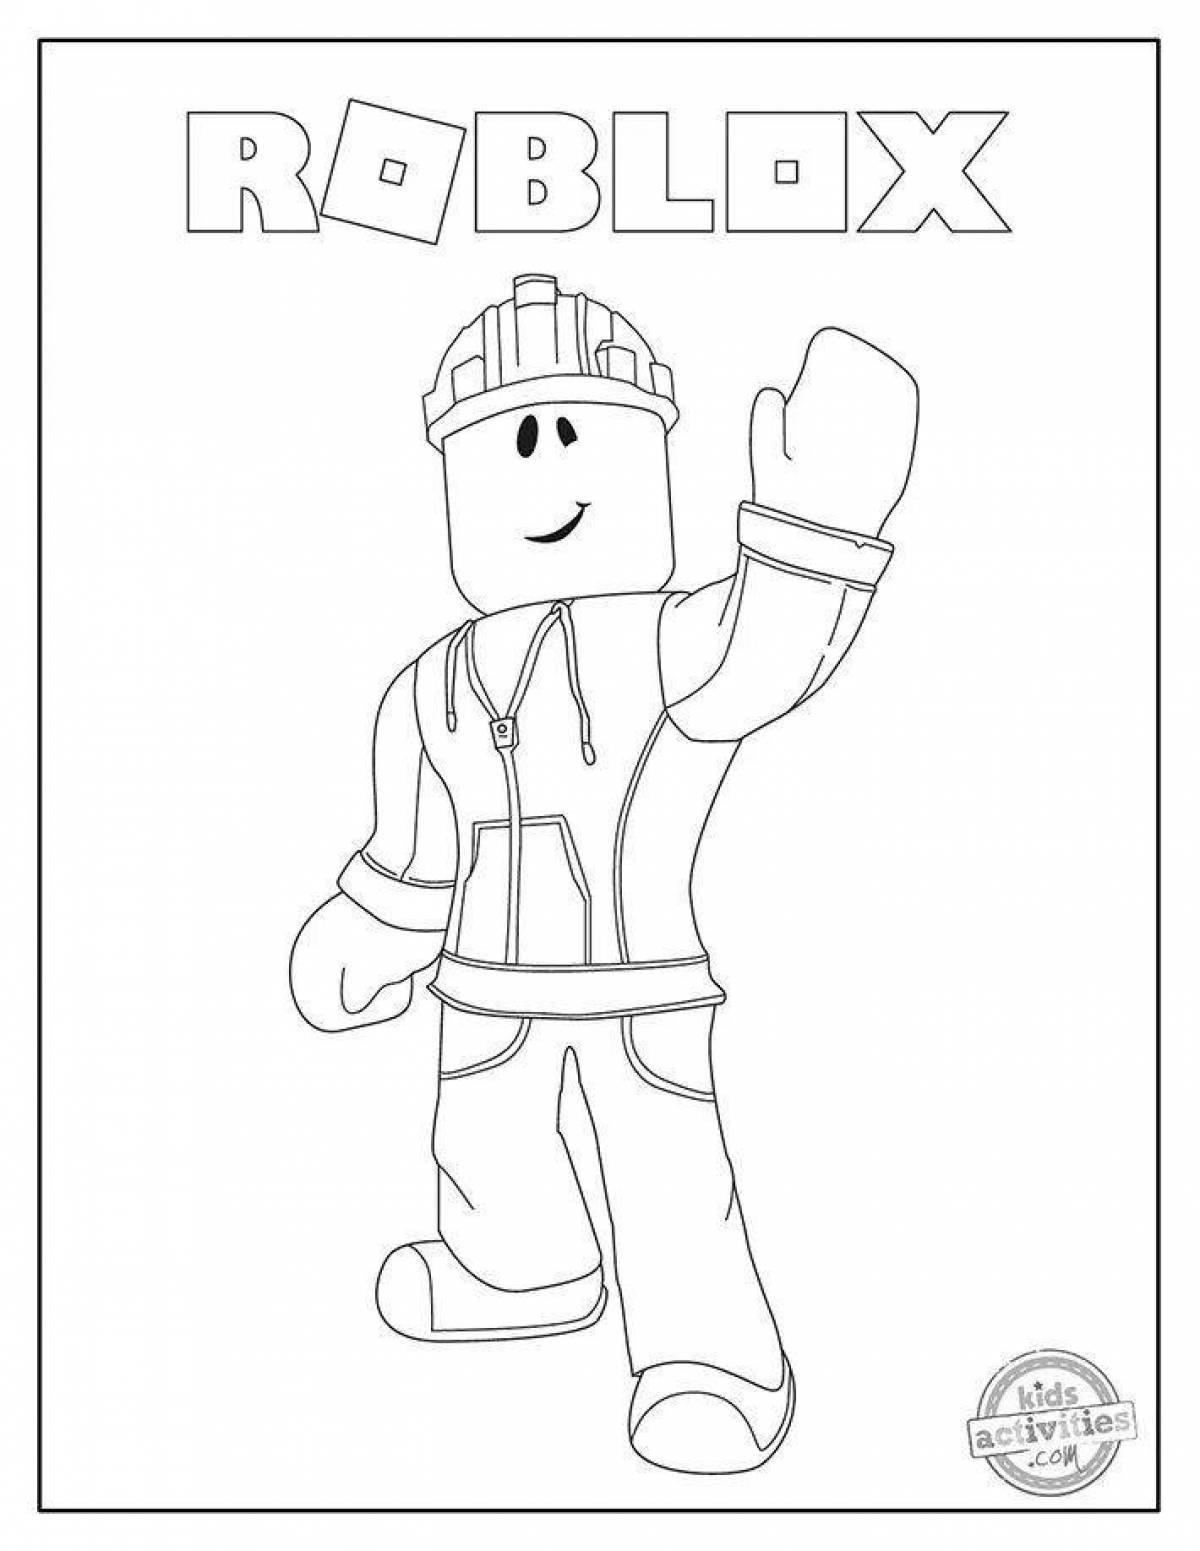 Complex roblox face coloring page